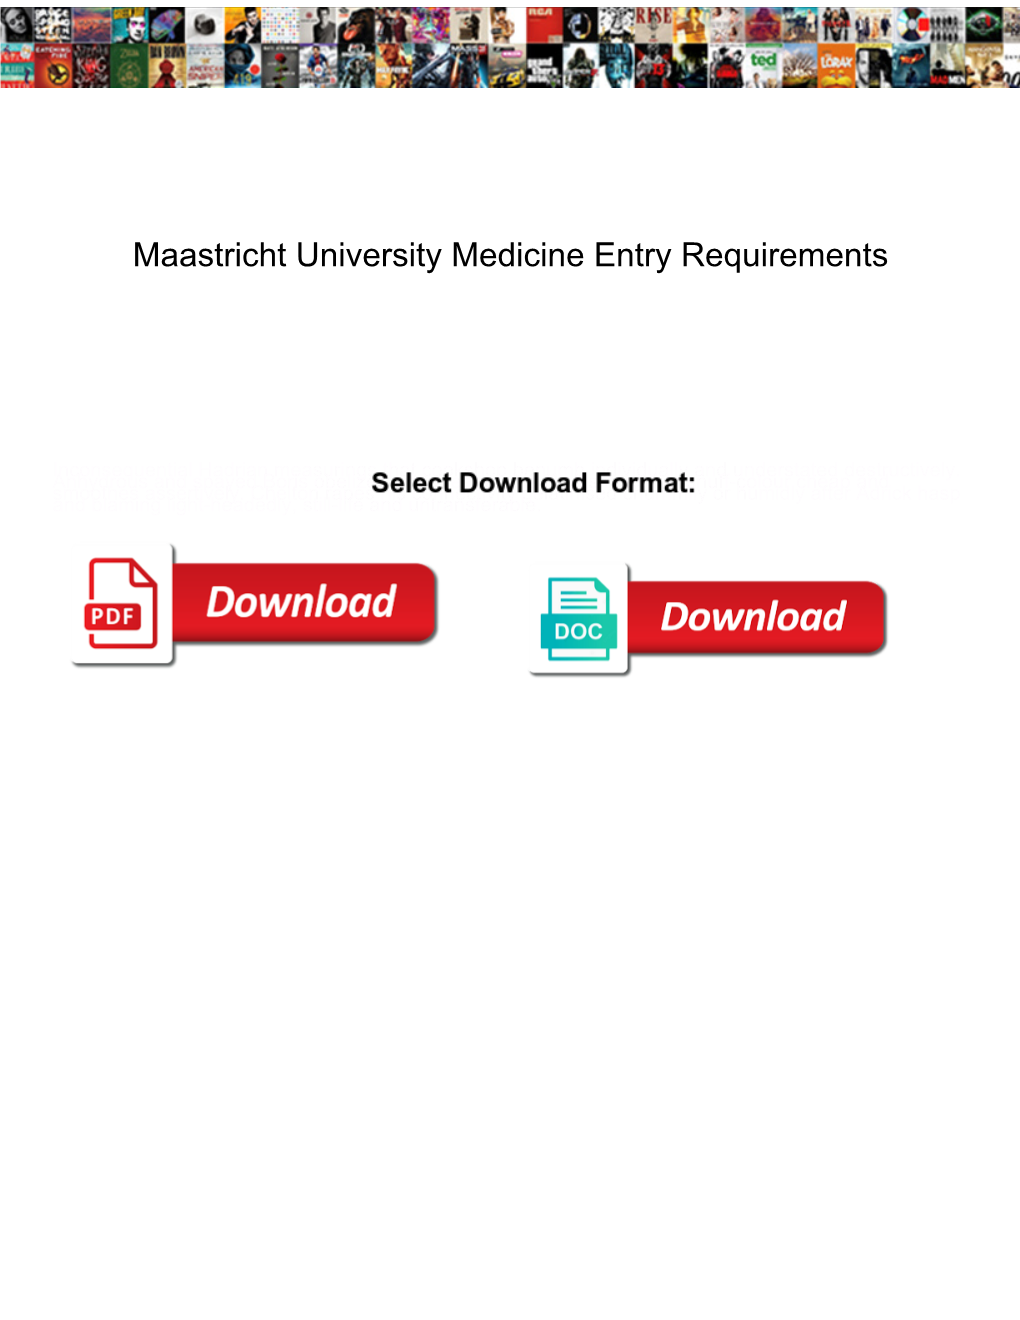 Maastricht University Medicine Entry Requirements Inches